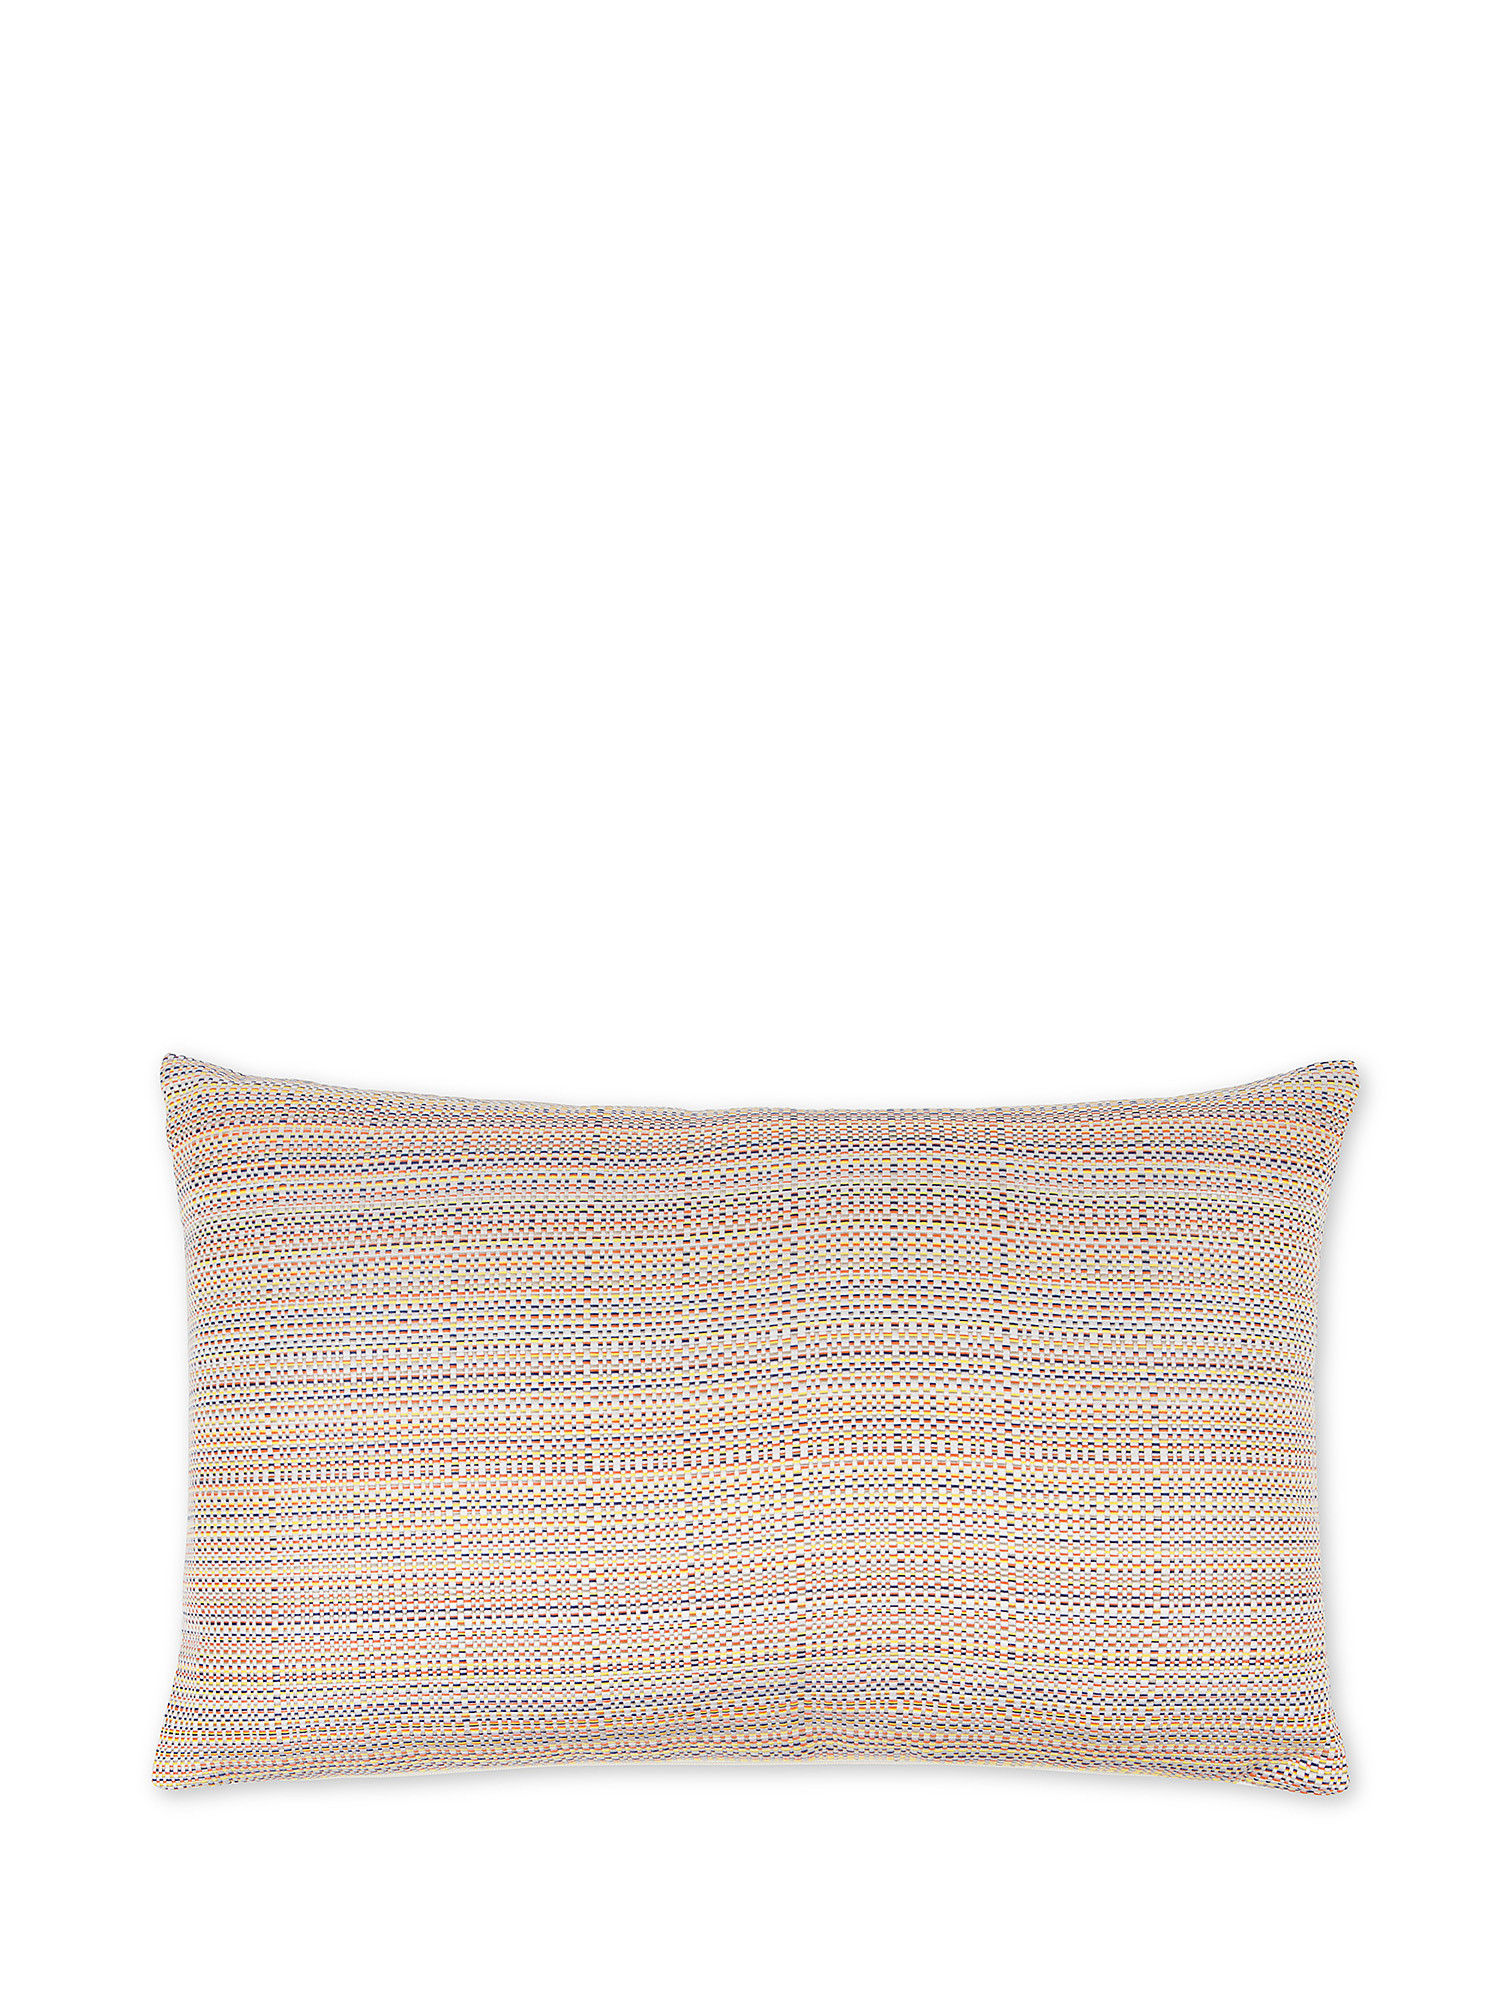 35x55 cm outdoor cushion with striped pattern, with zip and padding., Multicolor, large image number 1